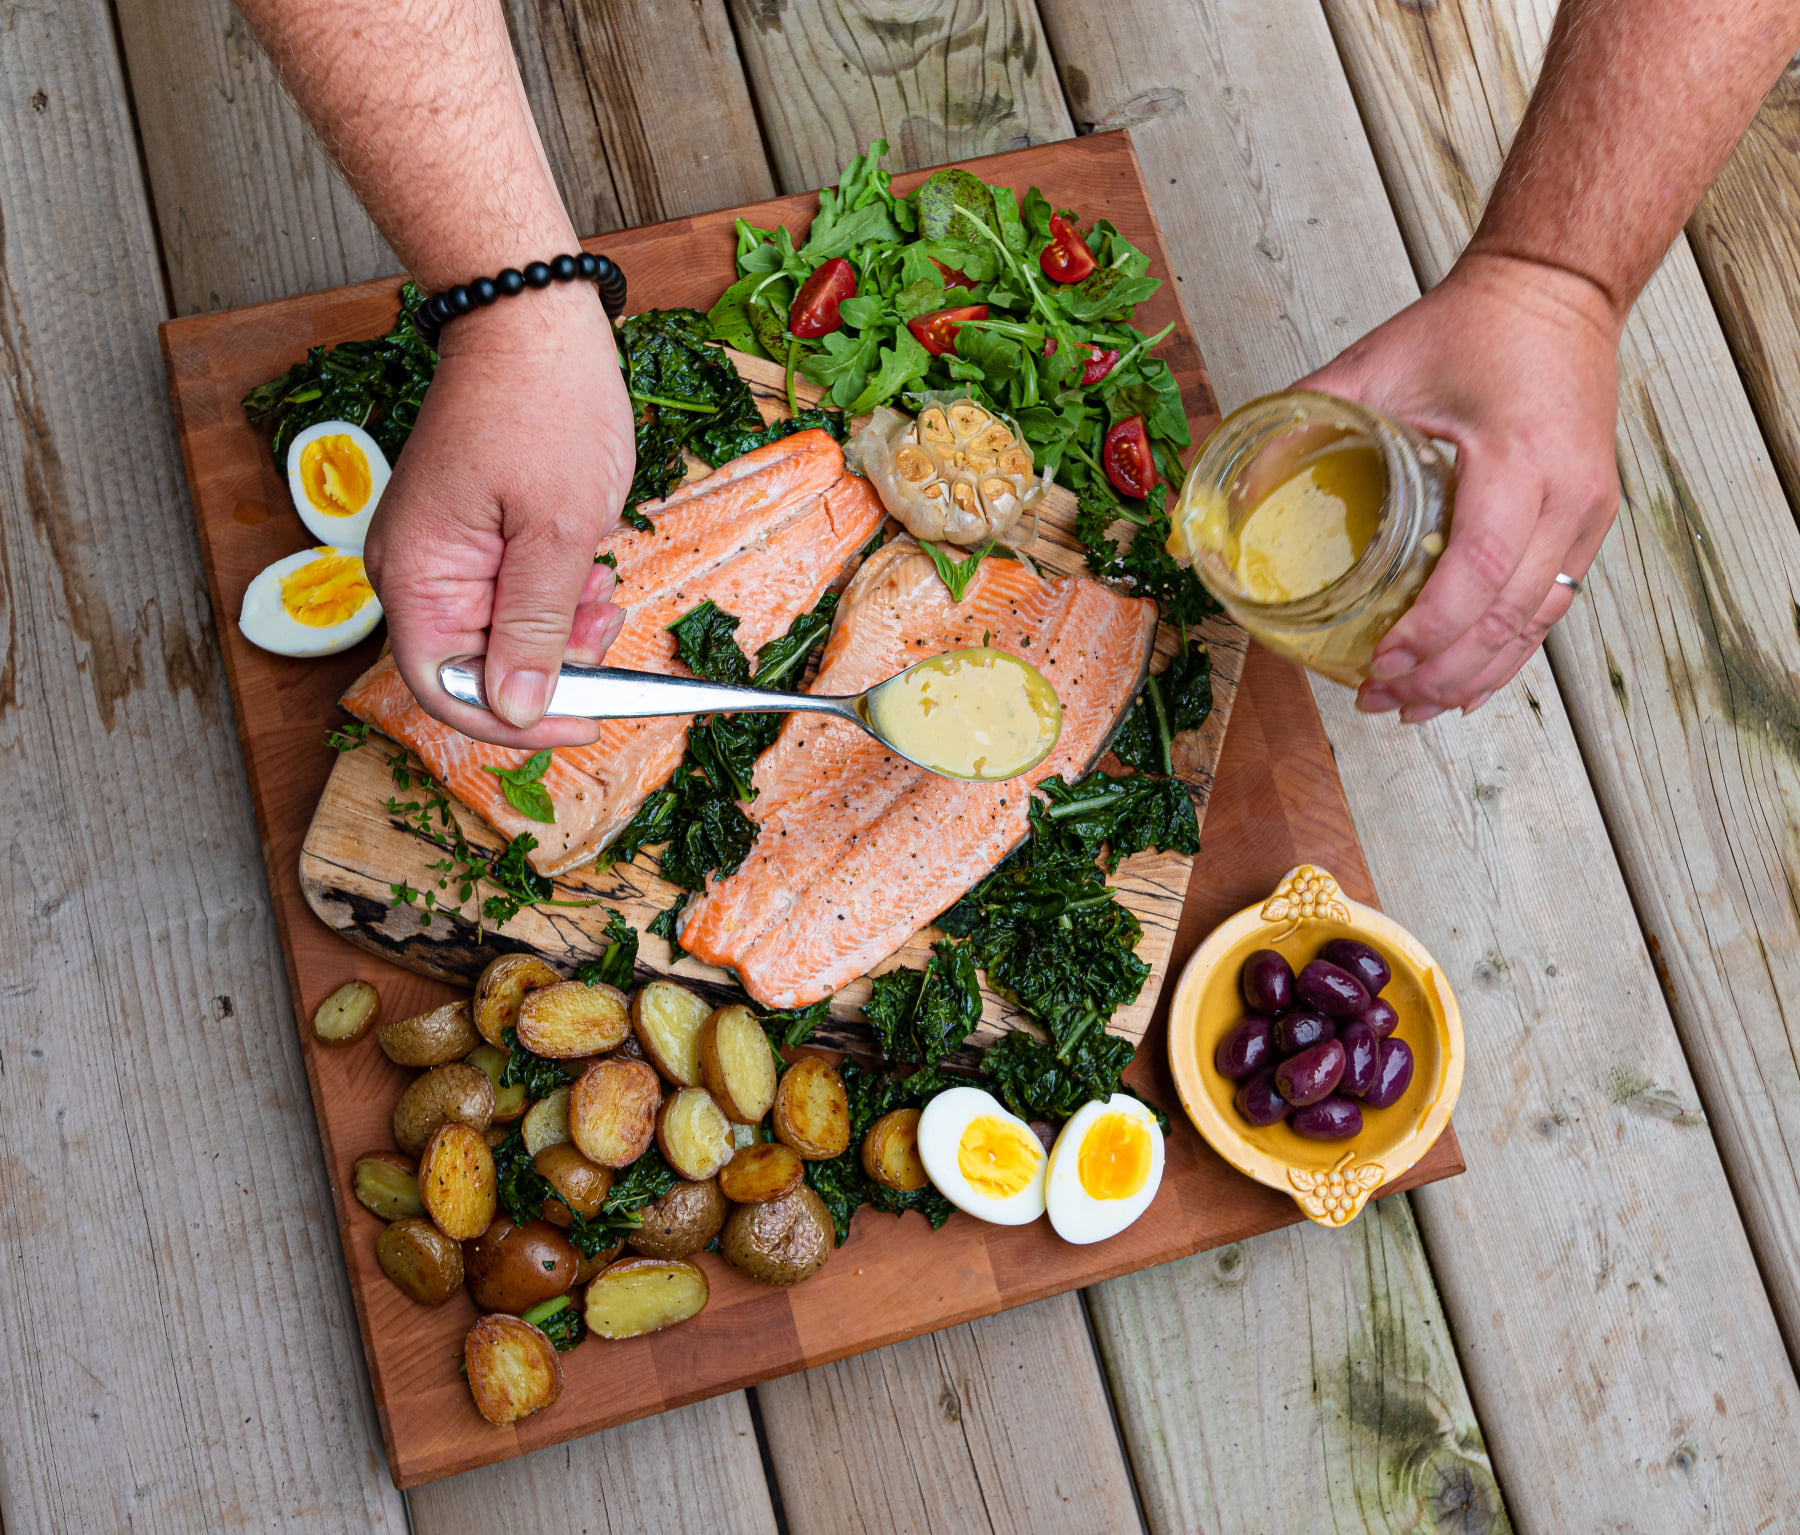 trout nicoise salad explaining nutrients in farmed fish